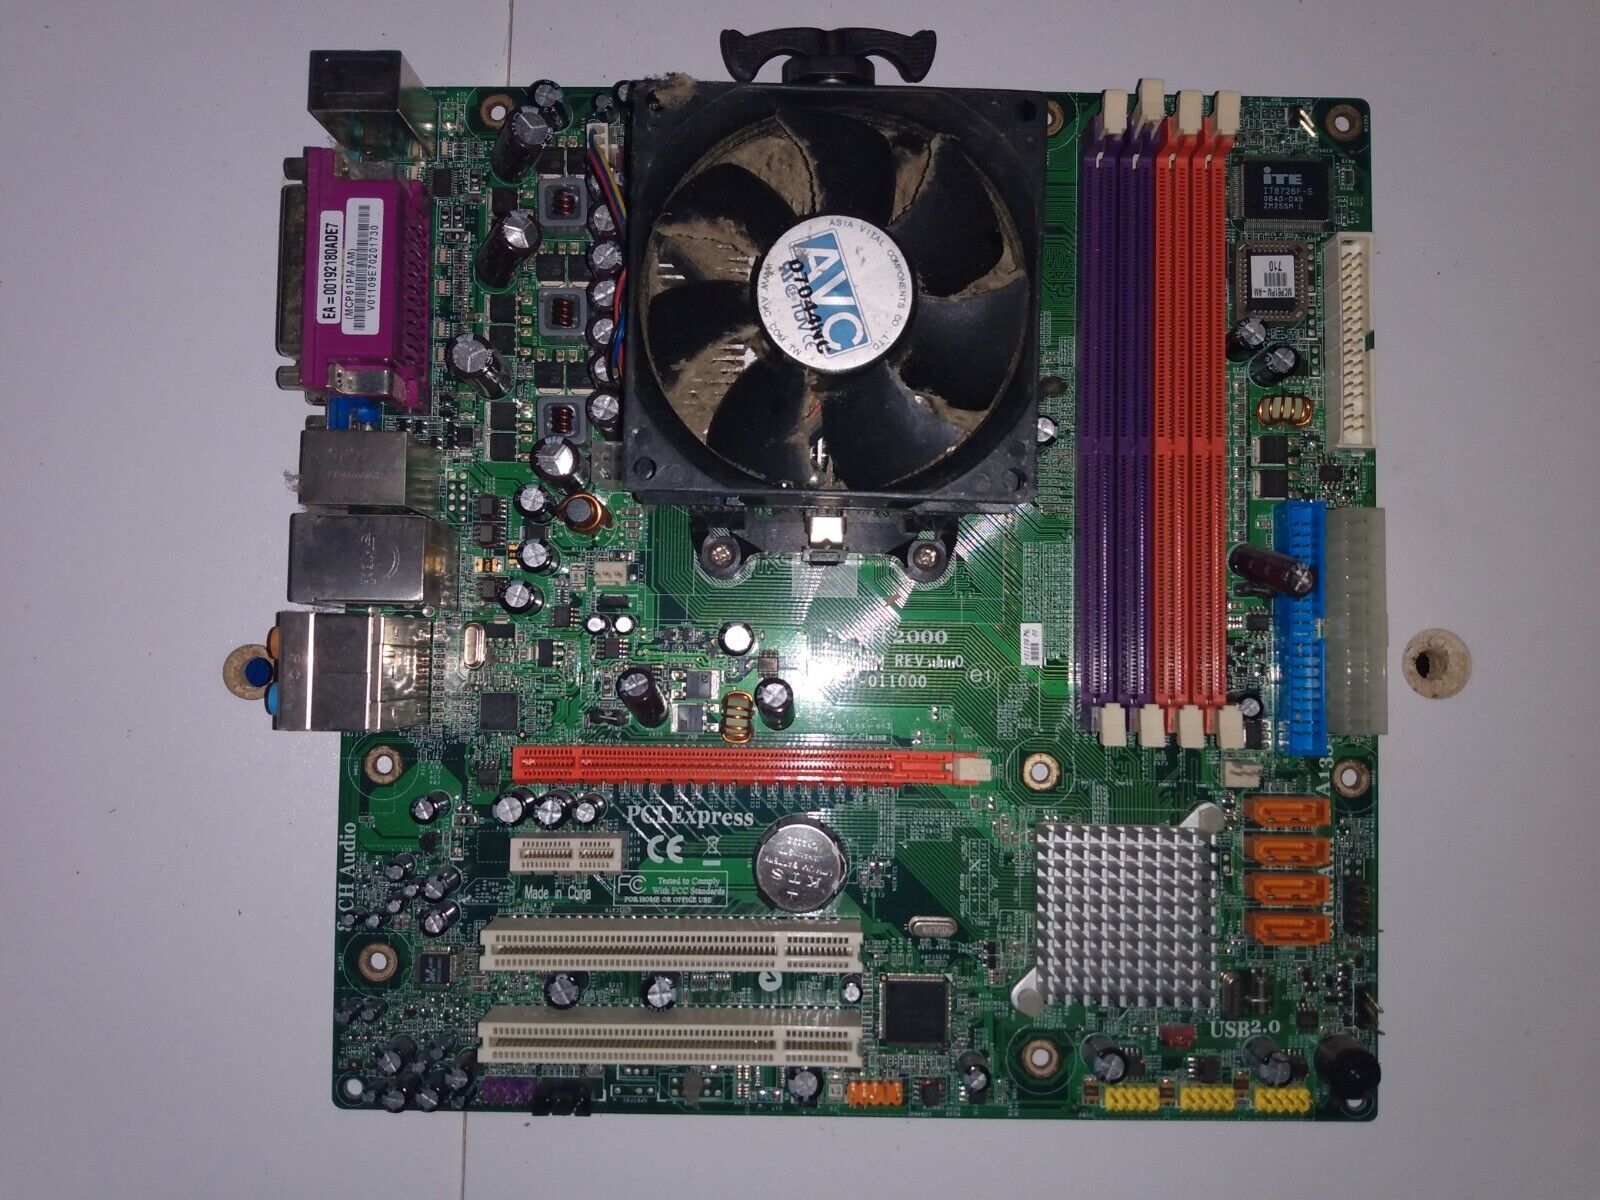 ECS HT2000 MCP61PM-AM REV 1.0 DESKTOP MOTHERBOARD ONLY FOR PARTS/REPAIR PREOWNED